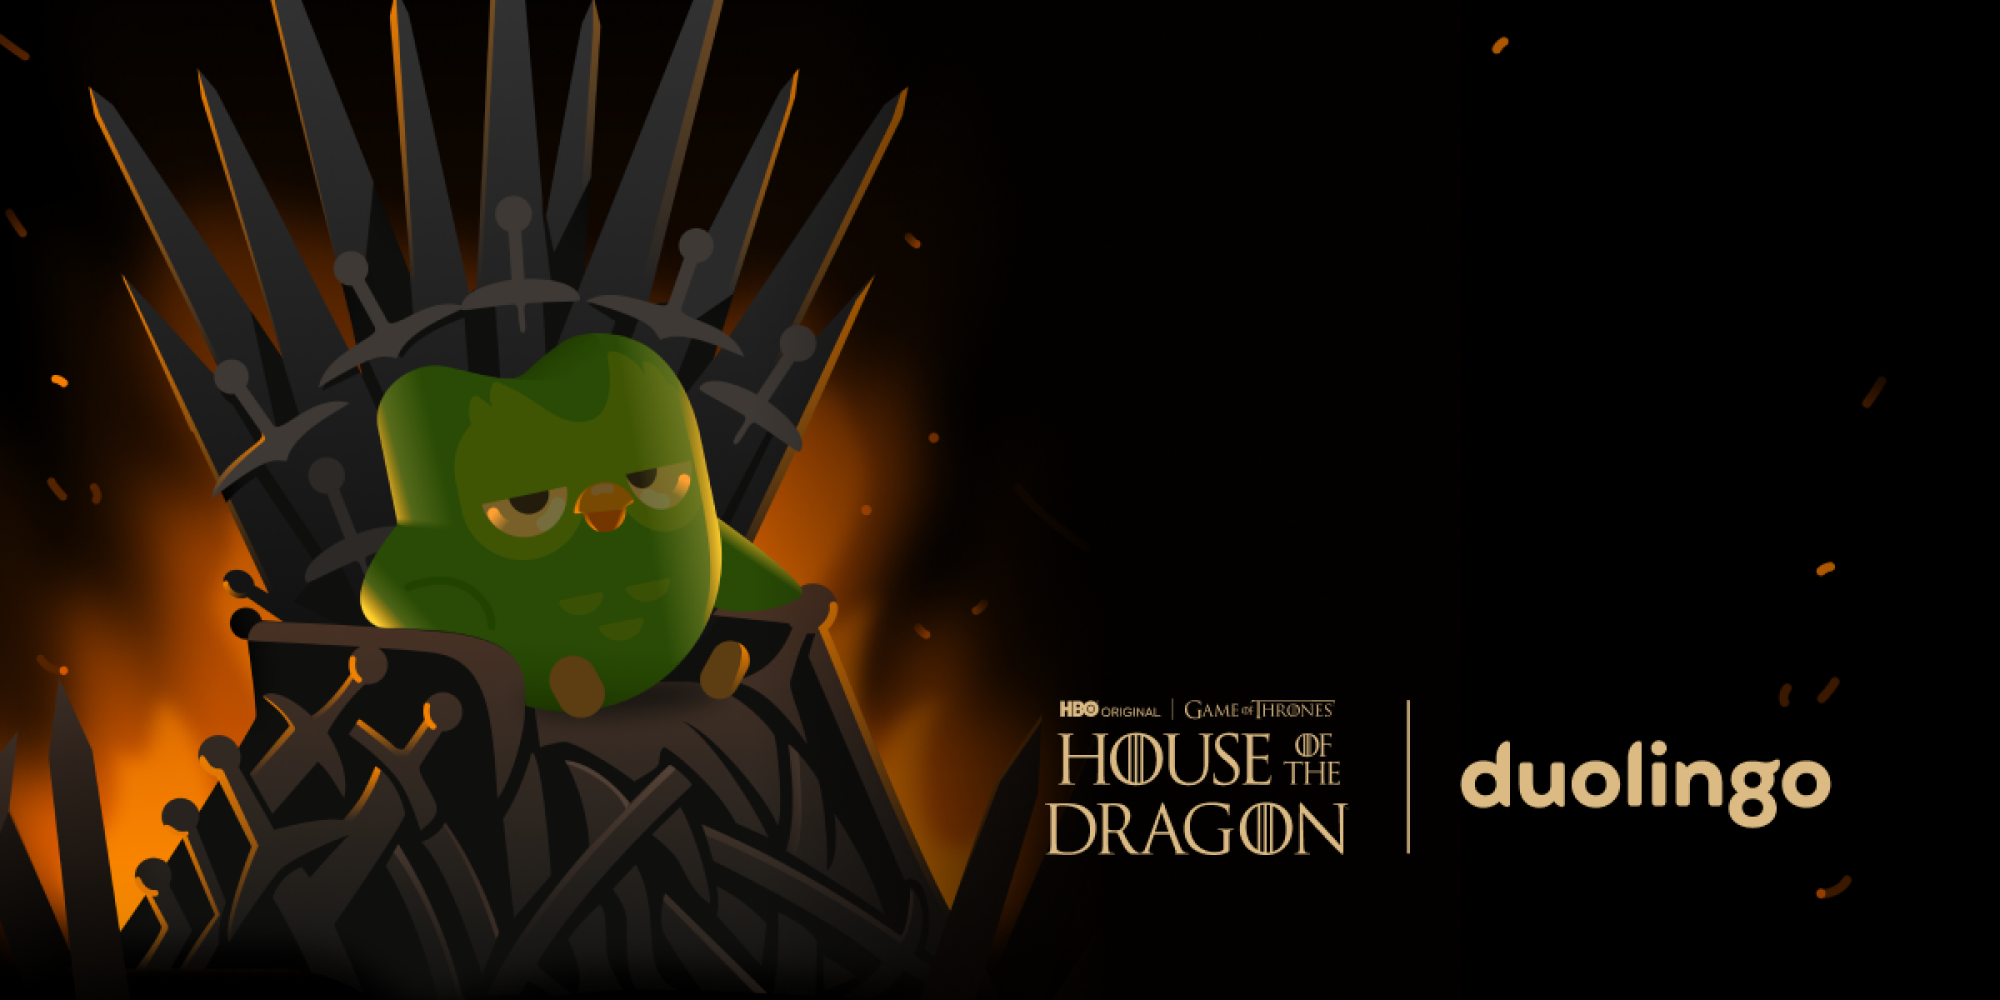 A green owl sits on the Iron Throne.